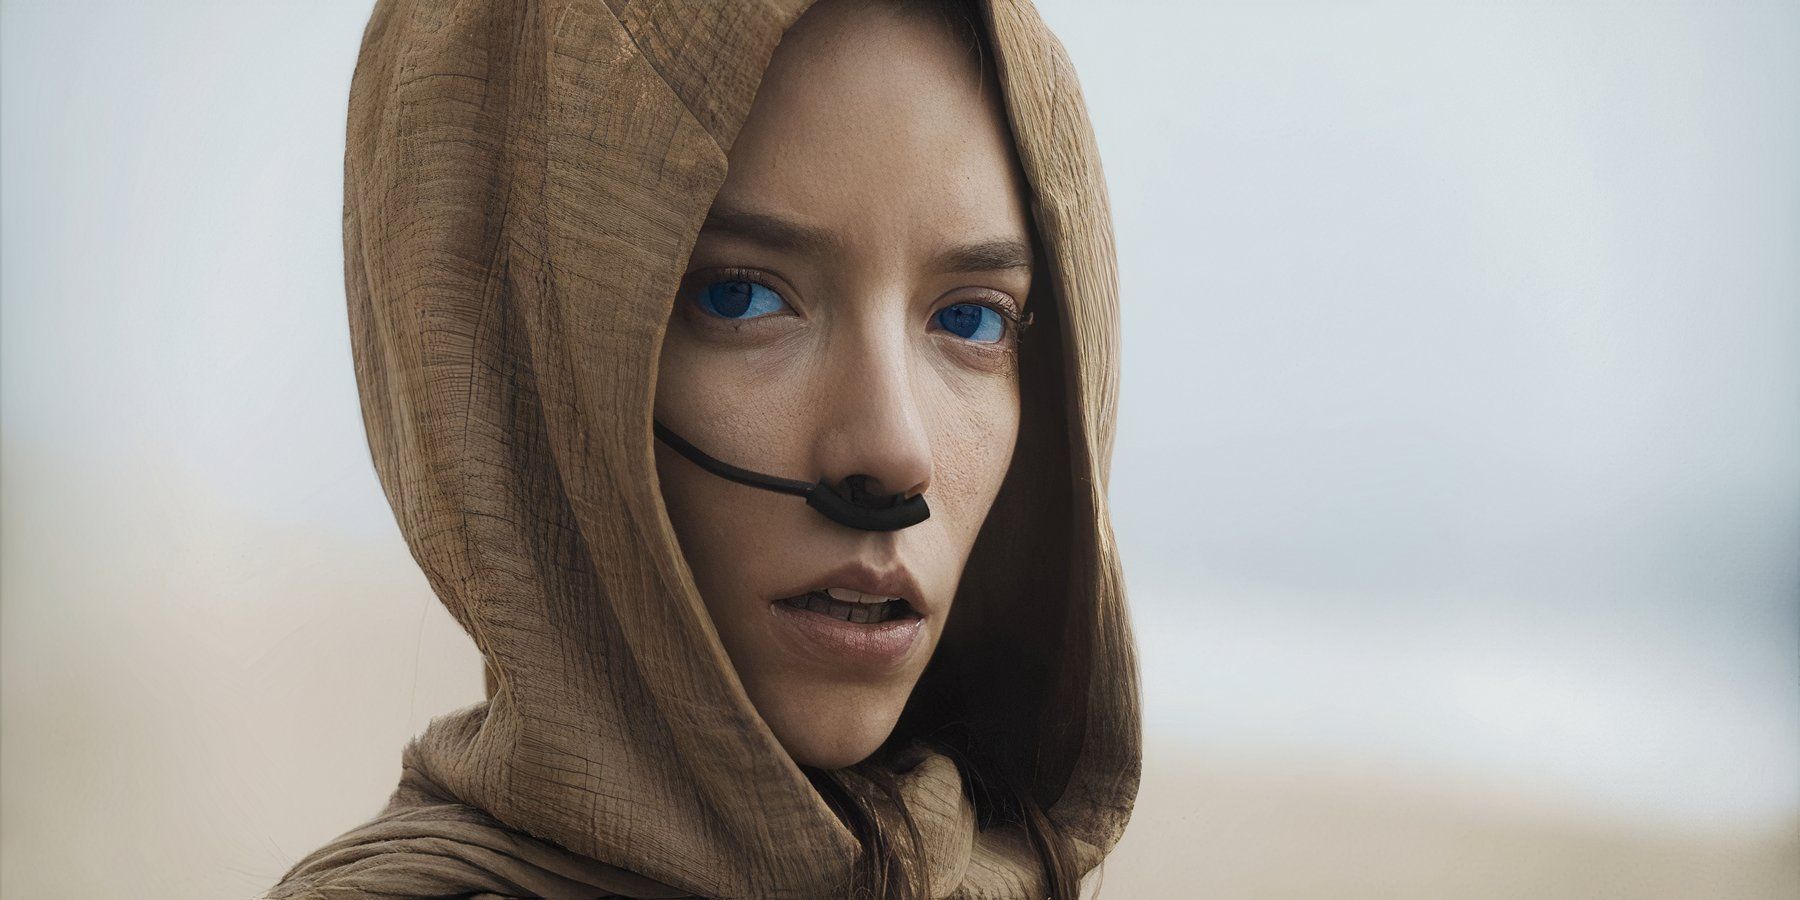 Alia Atreides played by Anya Taylor-Joy in Dune Part Two